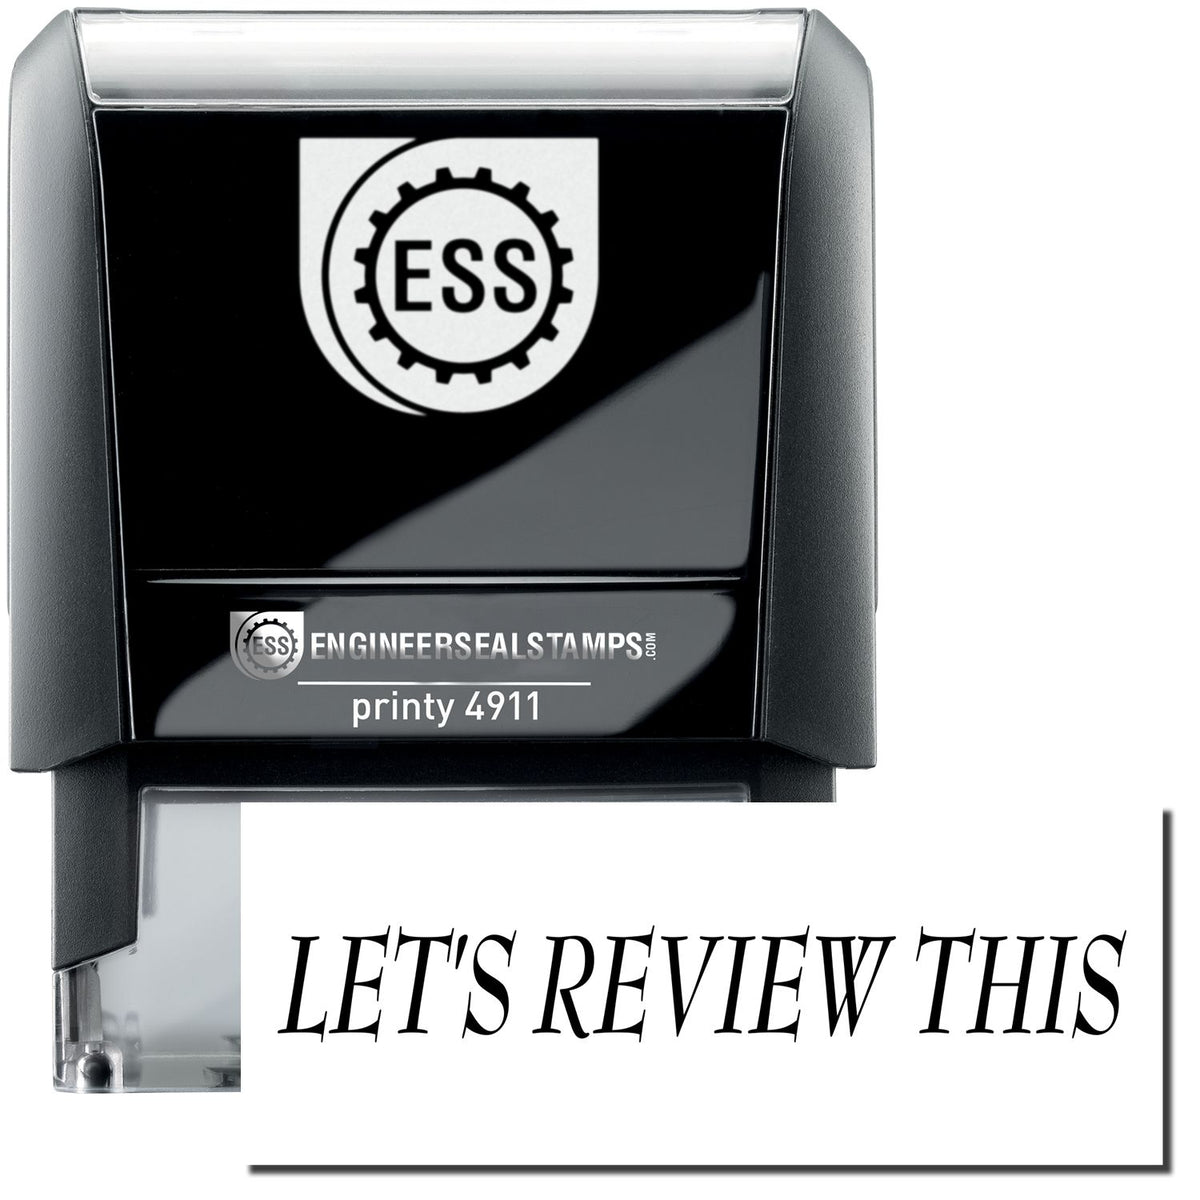 A self-inking stamp with a stamped image showing how the text &quot;LET&#39;S REVIEW THIS&quot; is displayed after stamping.